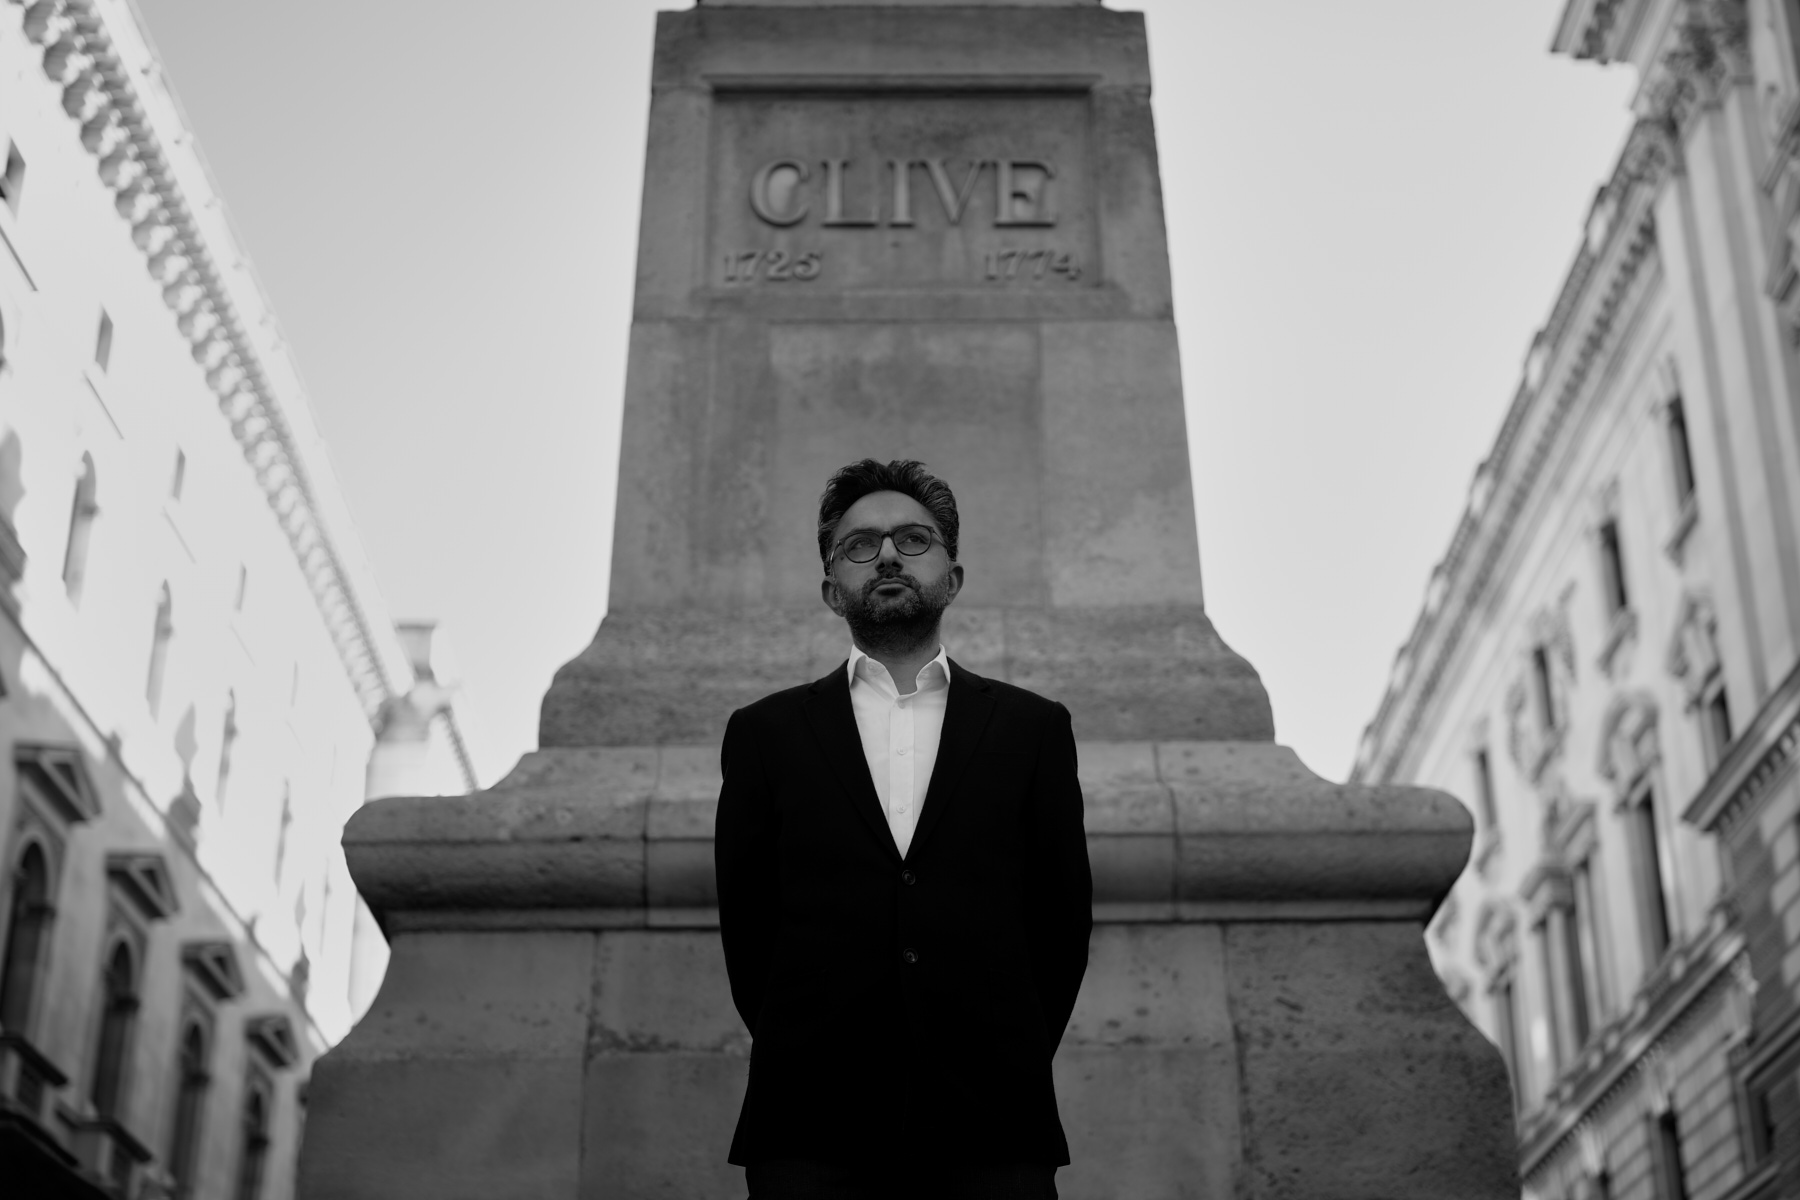 Black and white photograph of Sathnam Saghera, with his hands behind his back, in front of a statue of Sir Robert Clive in Whitehall.